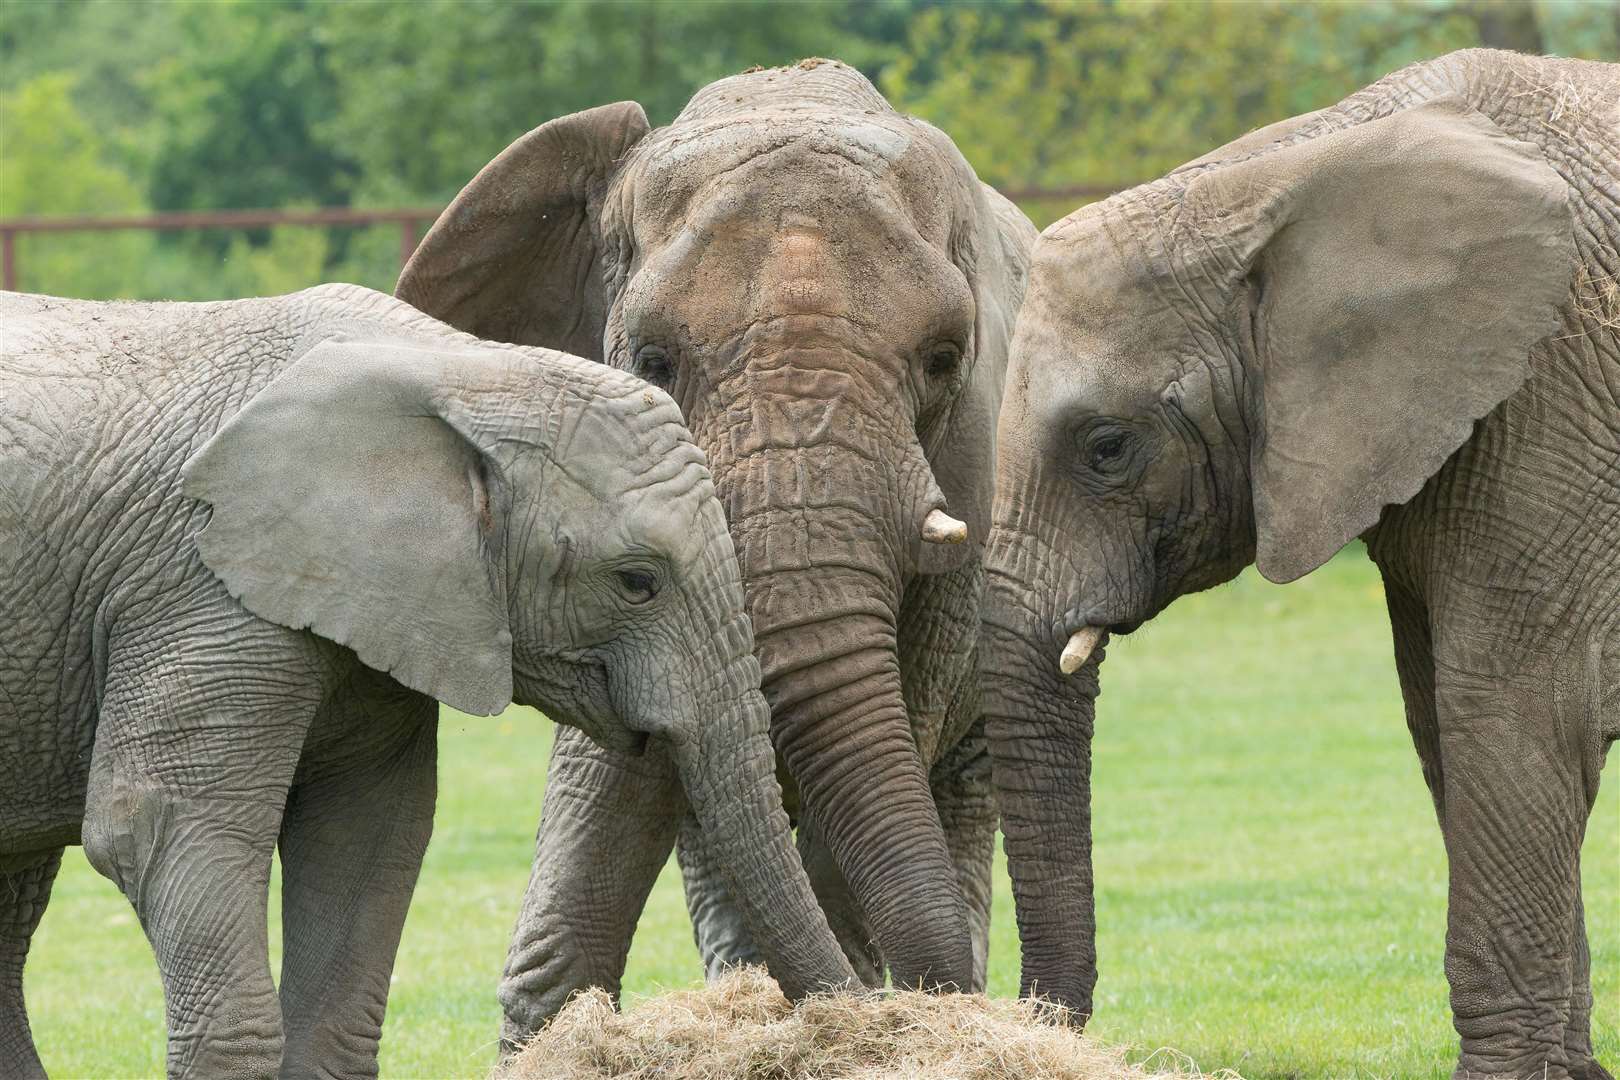 Howletts Wild Animal Park is making admission cheaper for families with its £1 child entry offer running until May 25.